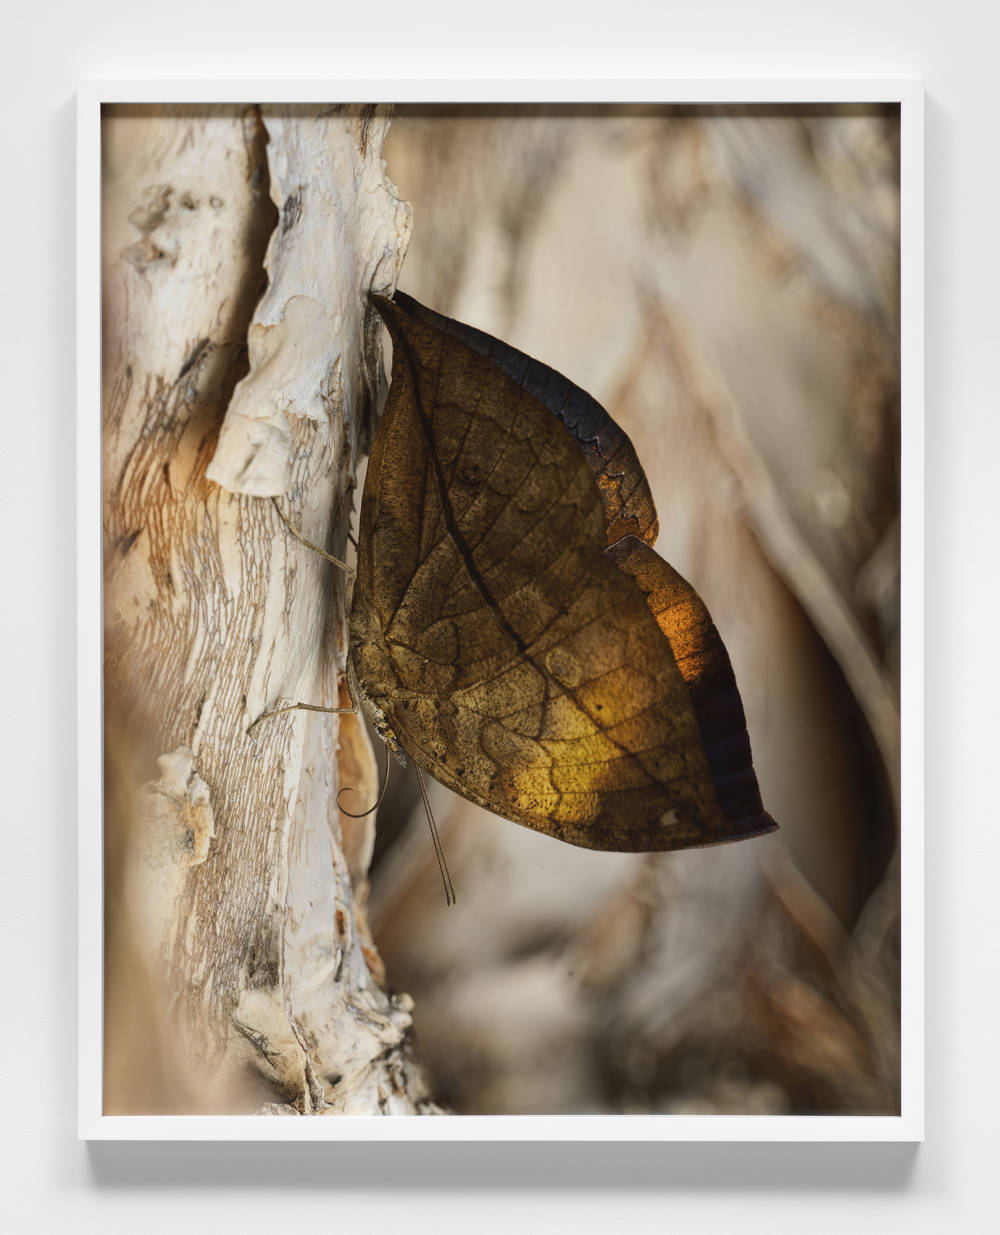 Image of a framed print by Jeffrey Stuker depicting a digitally rendered scene of a macro-image of a brown leaf-like butterfly hanging upside-down on a tree.